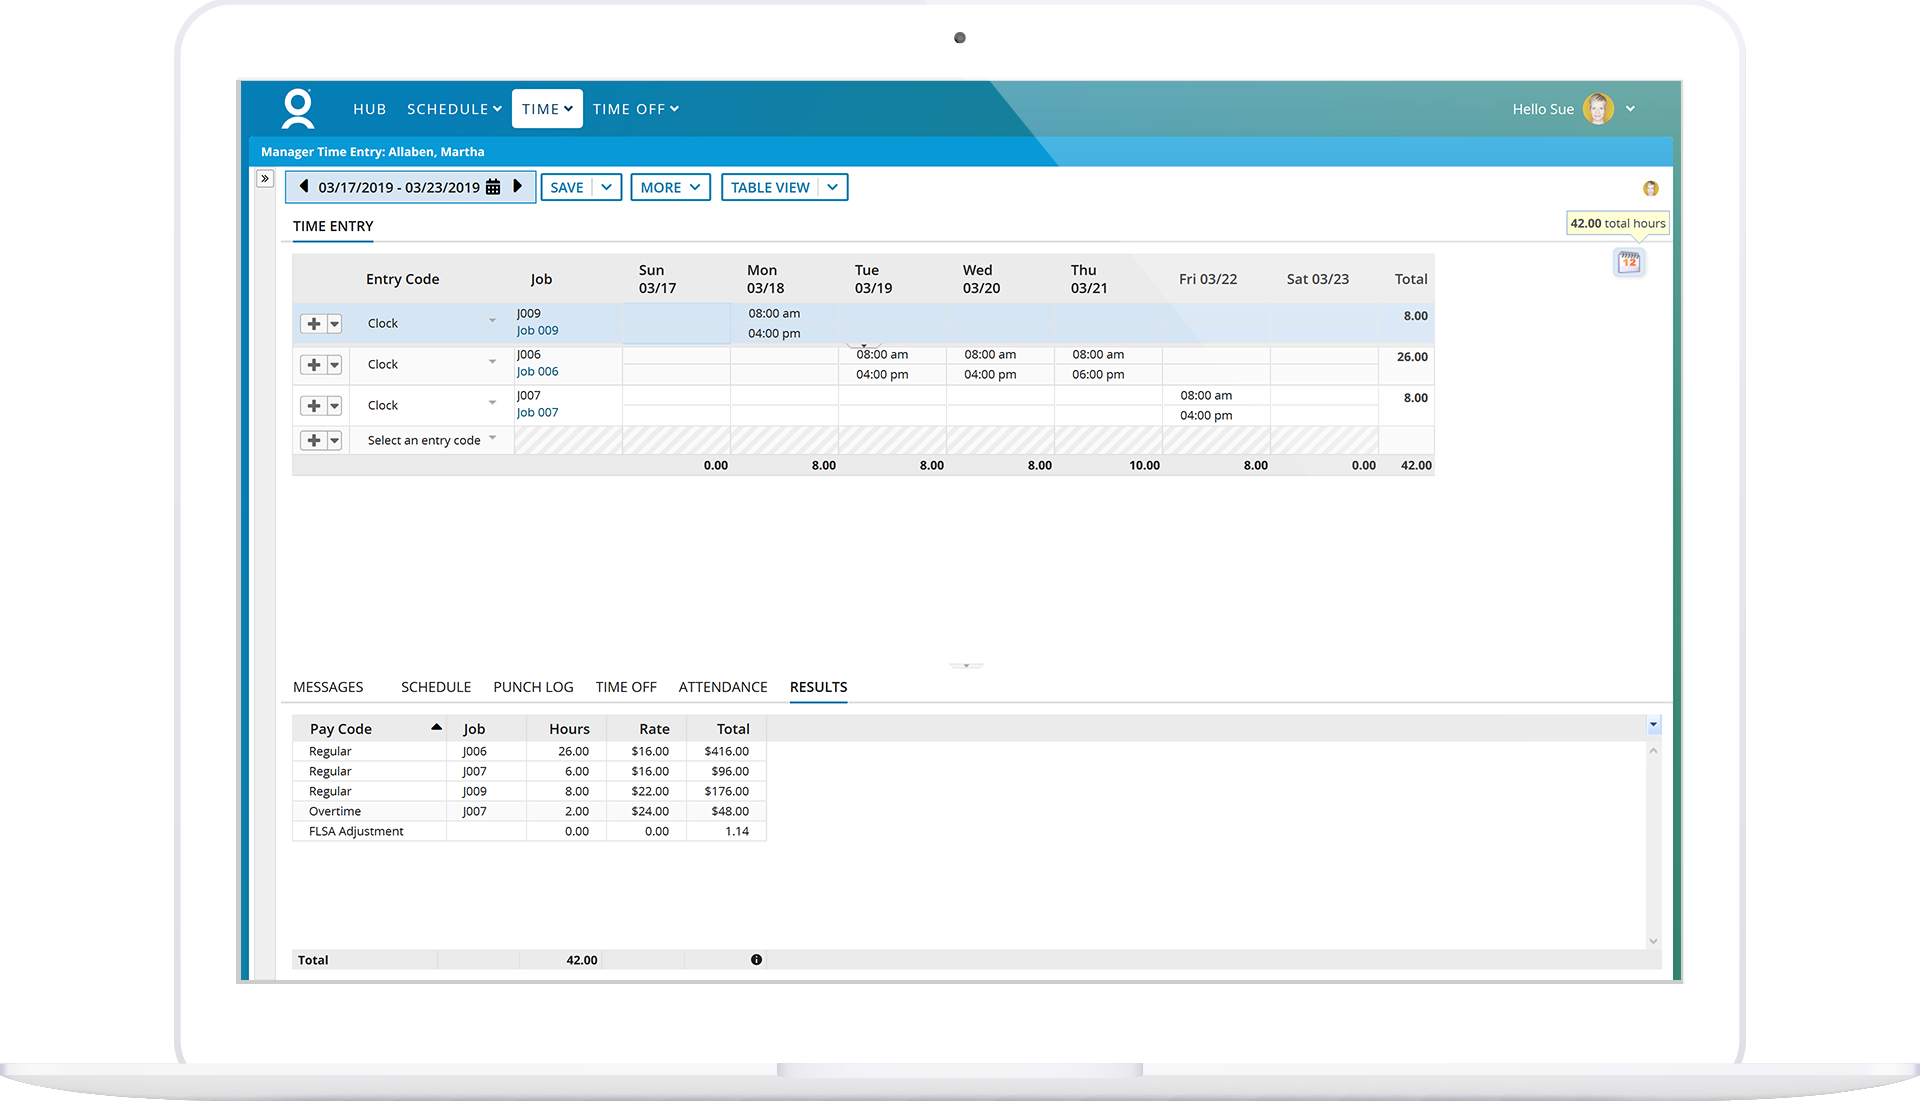 Employee Time Tracking and Data Capture